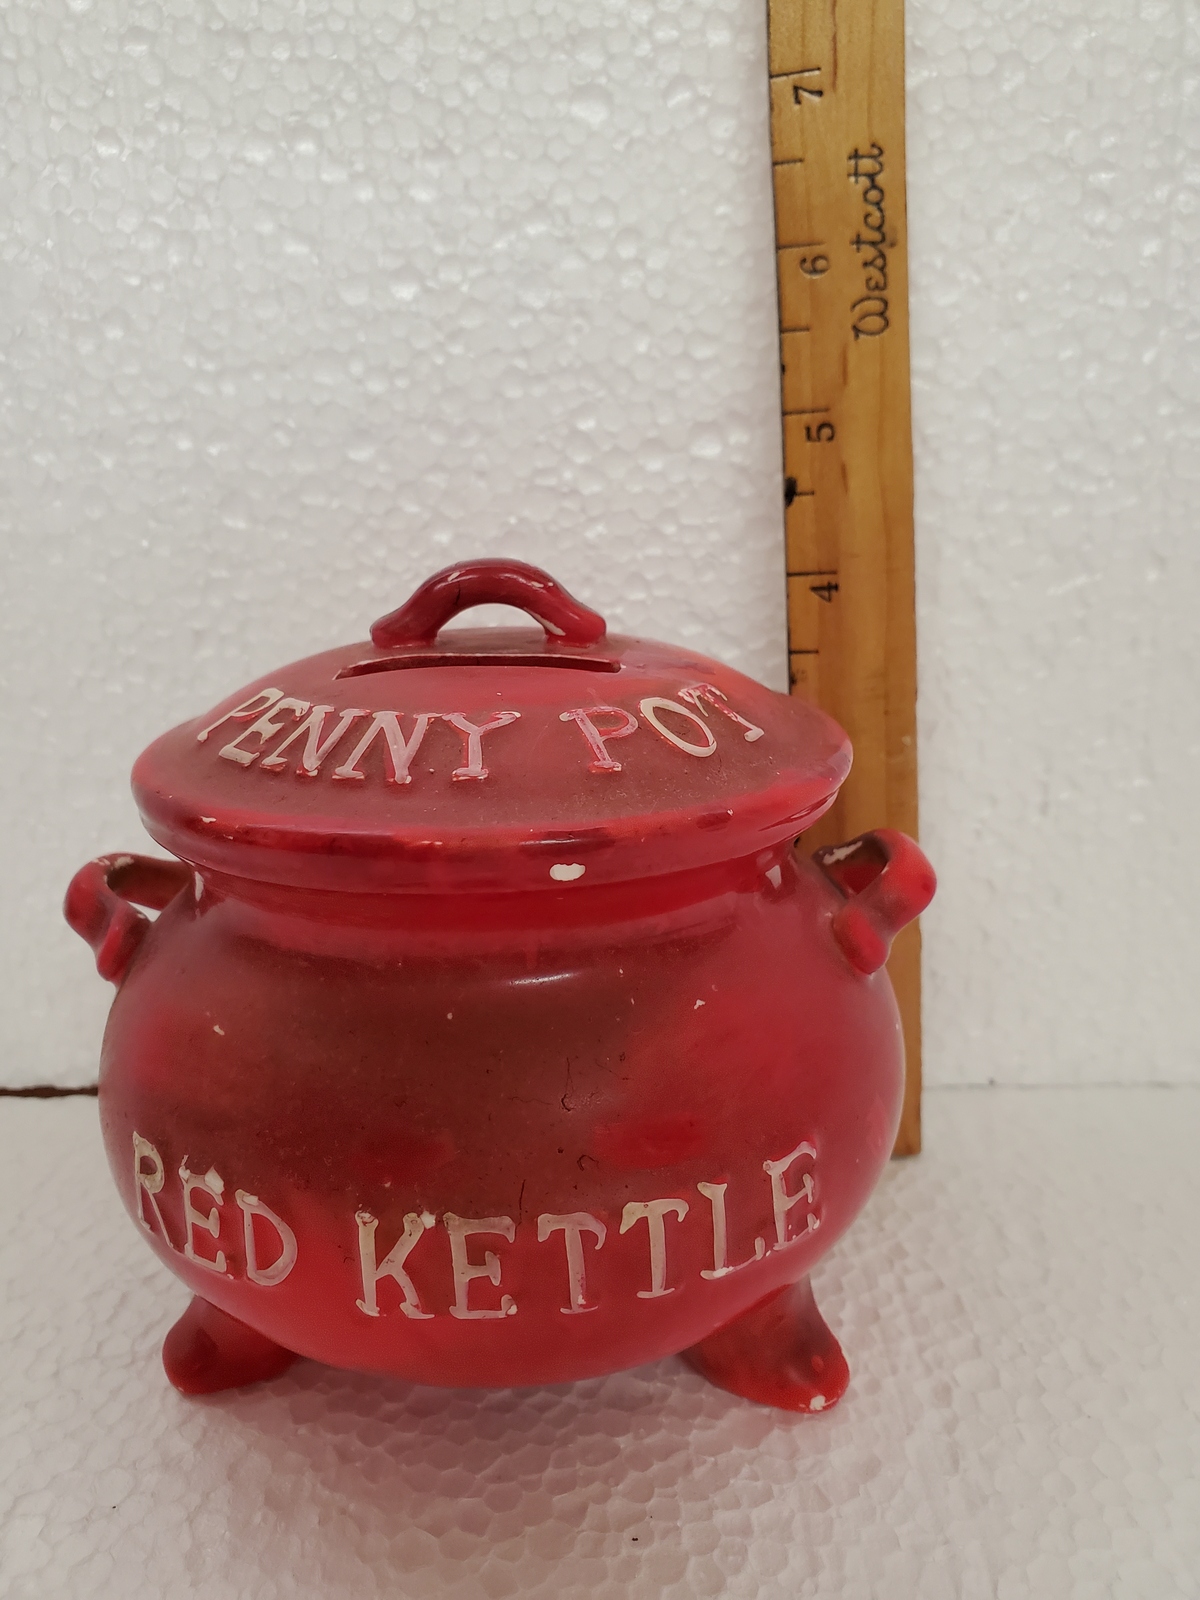 Primary image for Vintage red kettle penny pot